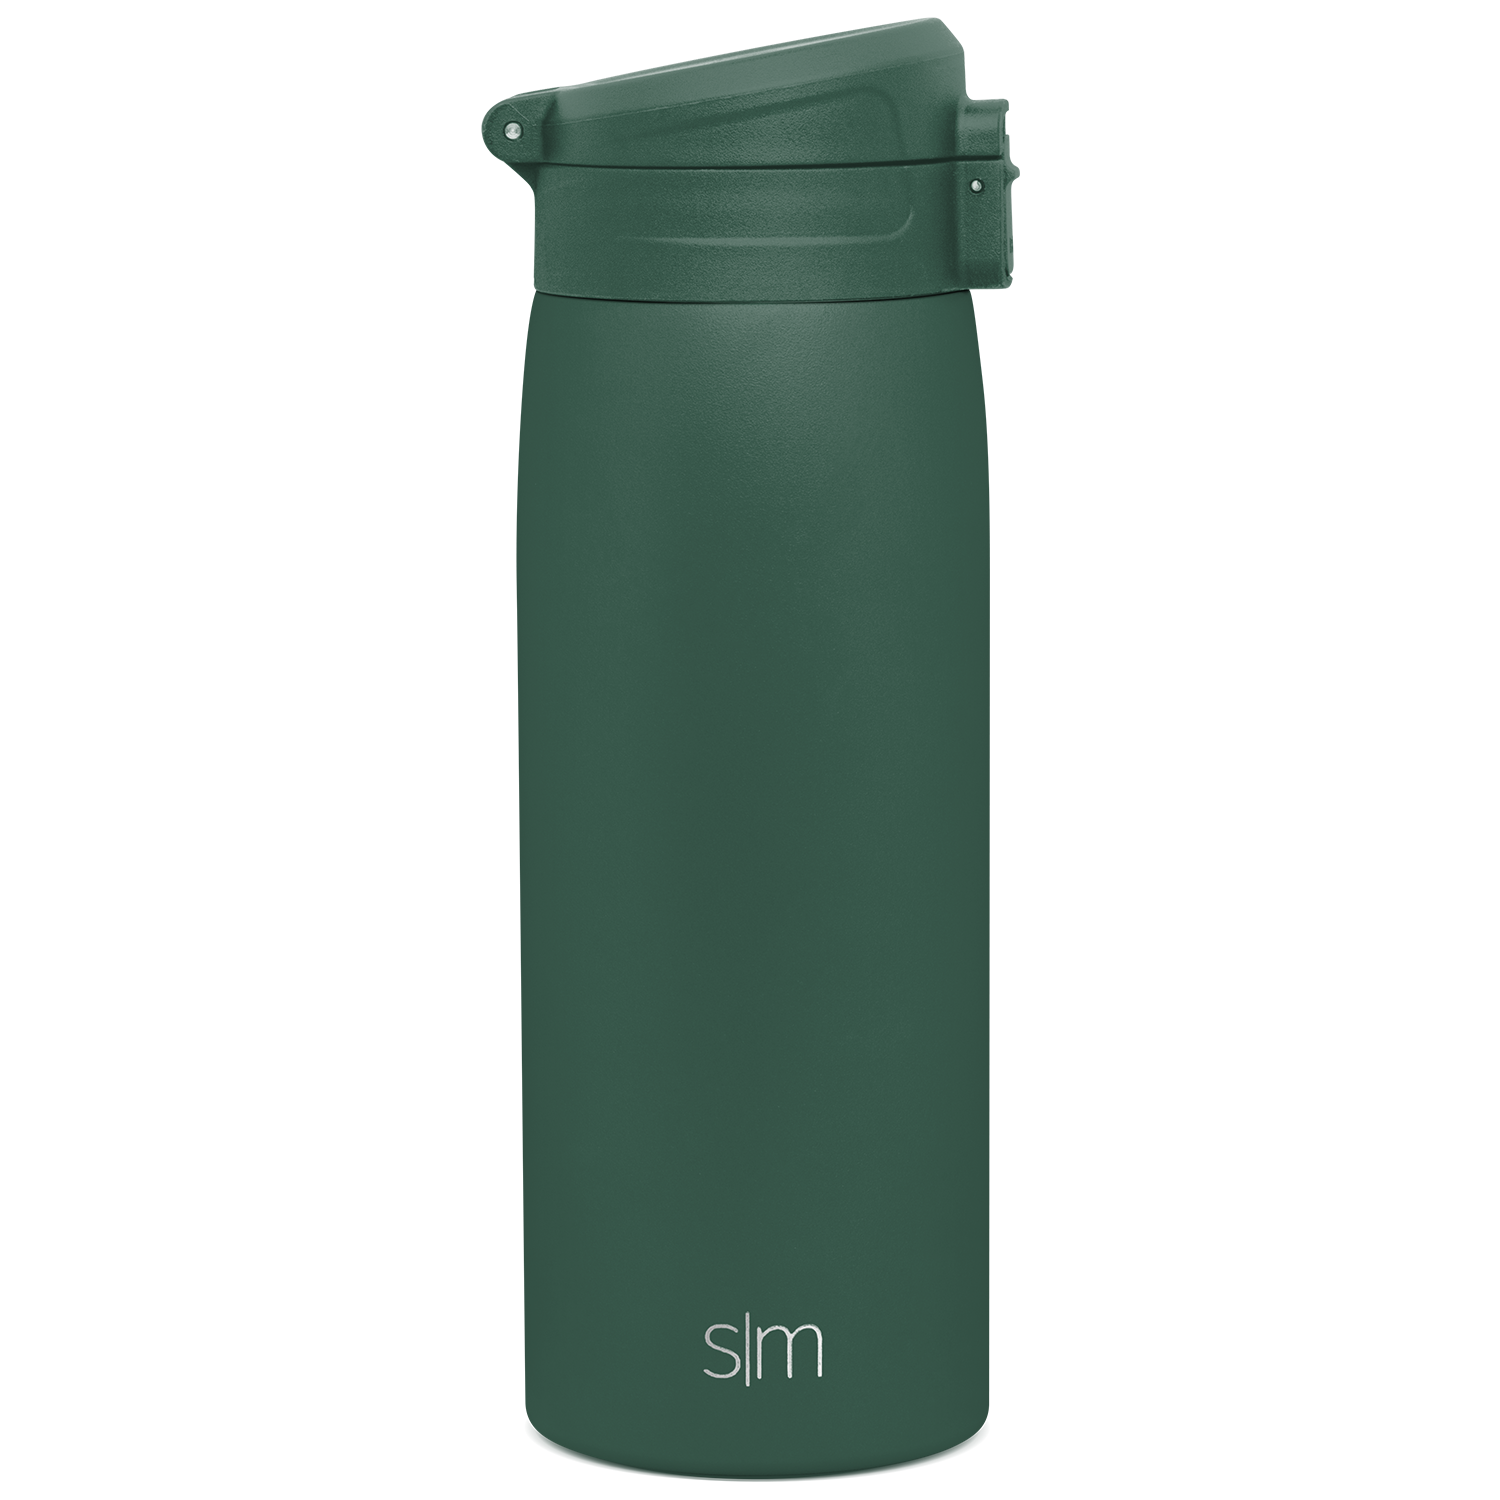 Buy Simple Modern Insulated Lid Replacement, Reusable Lid ONLY Fits Simple  Modern, S, M Kona, Thermos Lid for Travel Coffee Mug or Commuting Tumbler, Flip Lid, Kona Collection